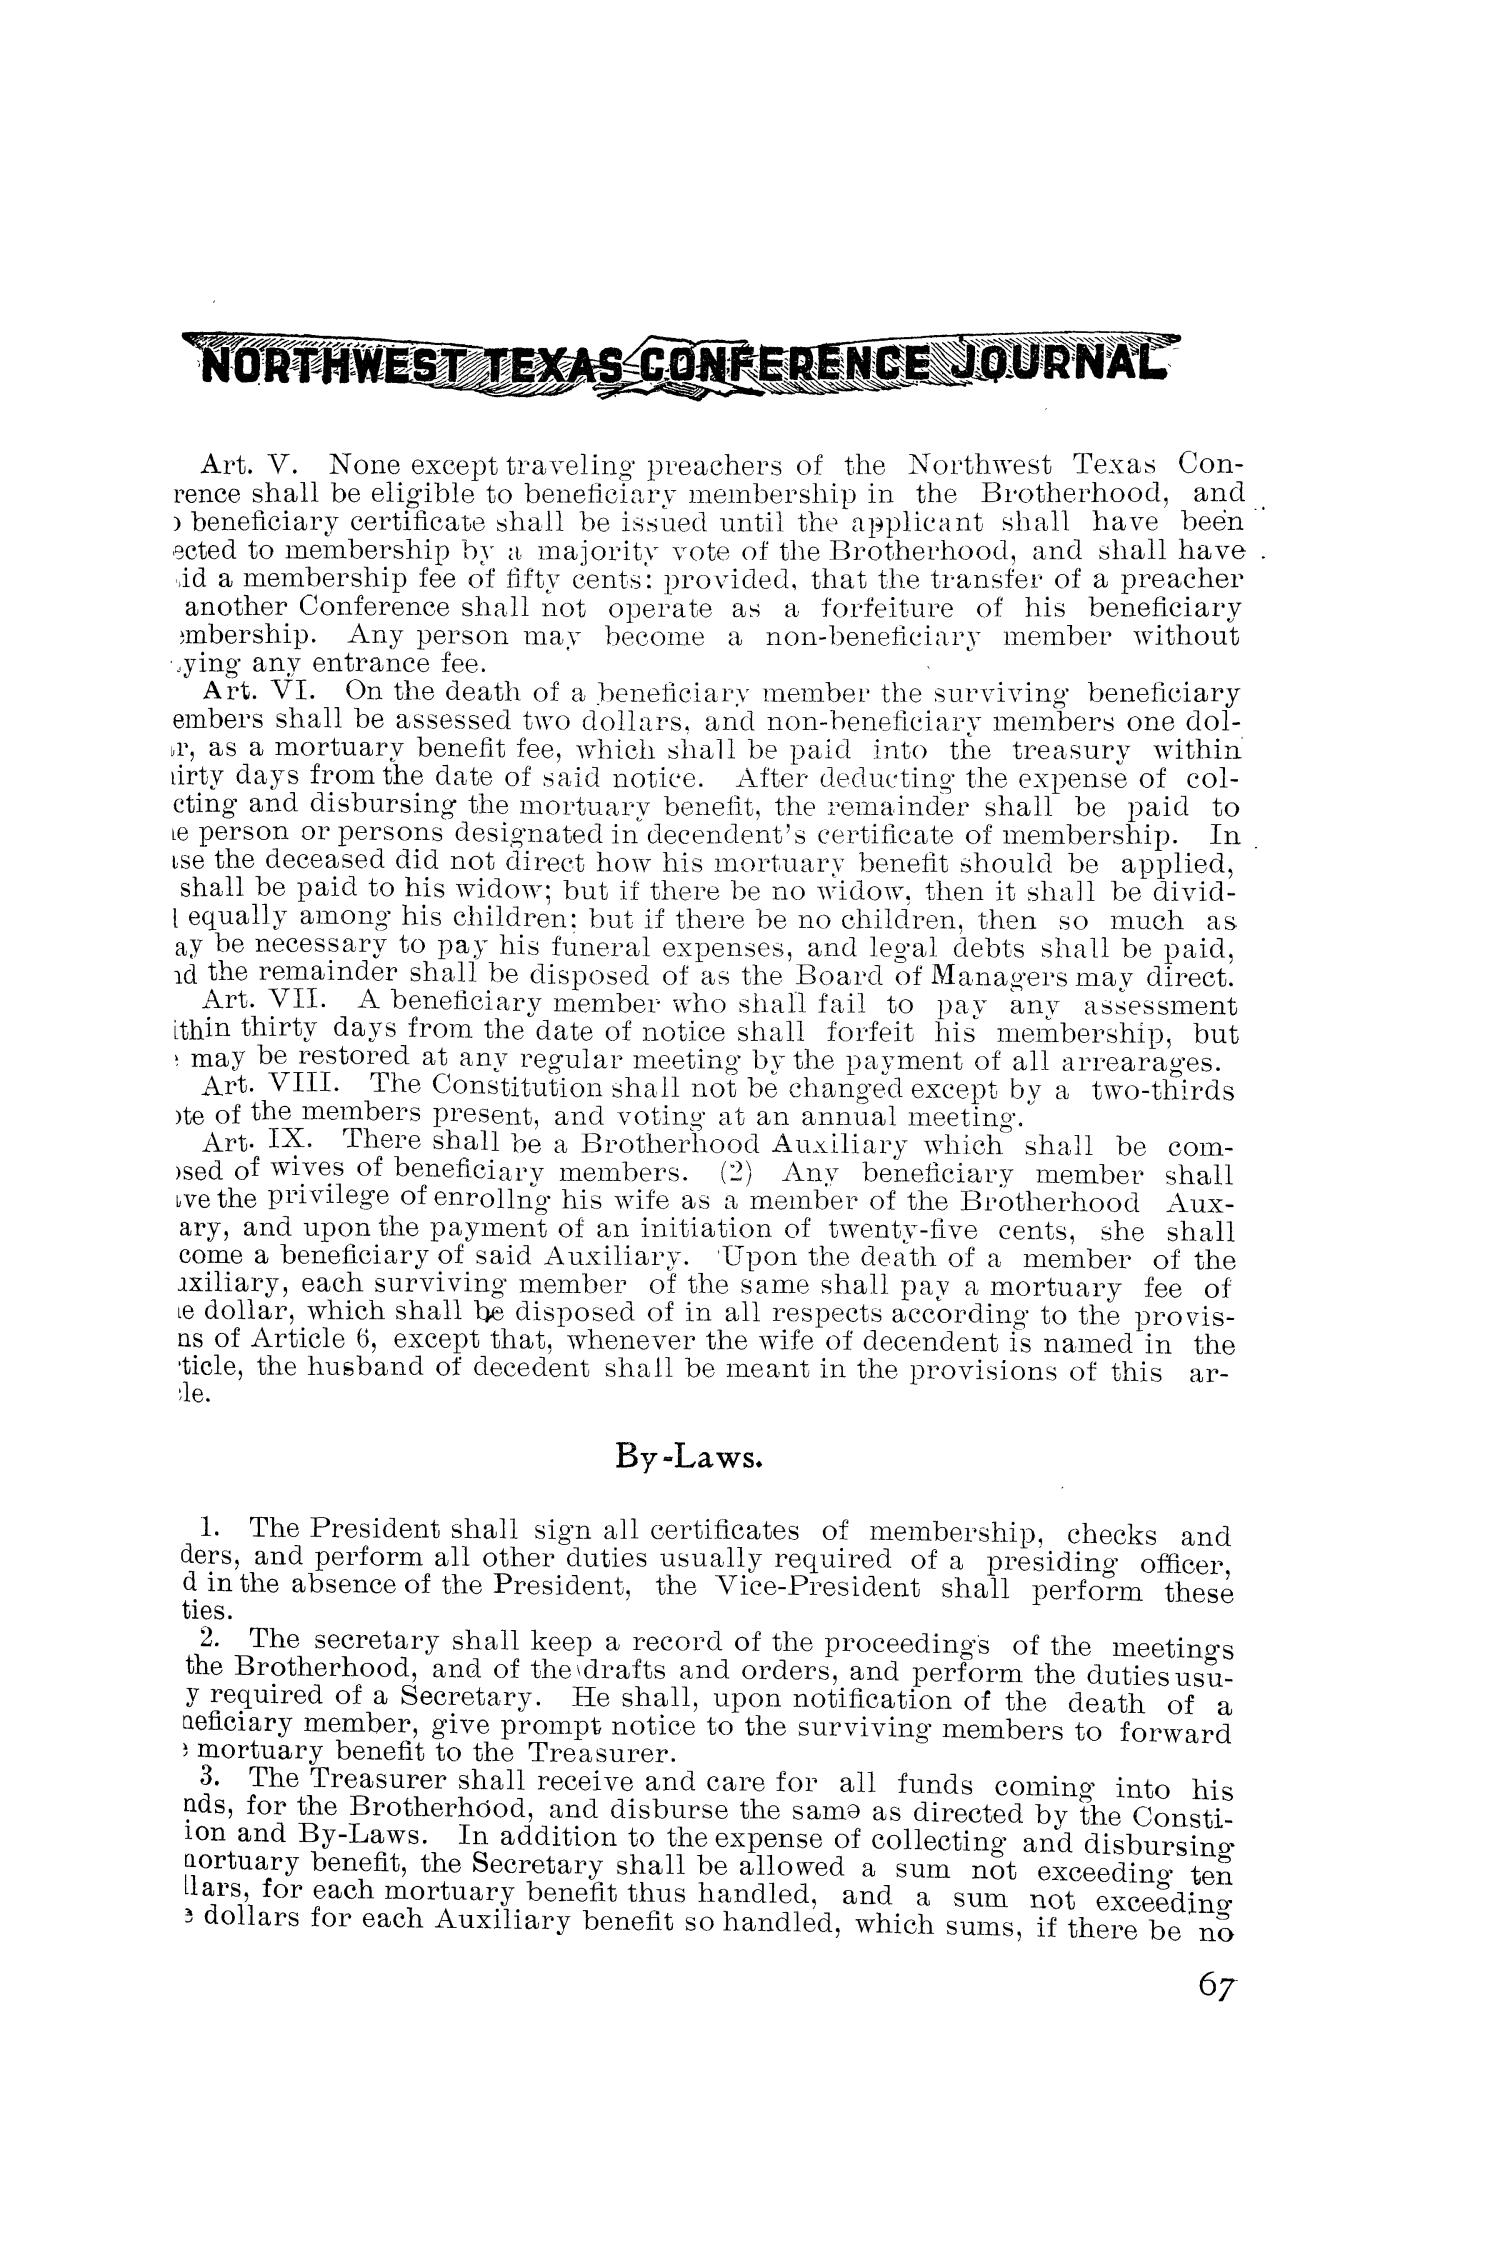 Journal of Proceedings of the Thirty-Ninth Annual Session of The Northwest Texas Conference, of the Methodist Episcopal Church, South, Held at Mineral Wells, Texas, November 16th to November 21st, 1904
                                                
                                                    67
                                                